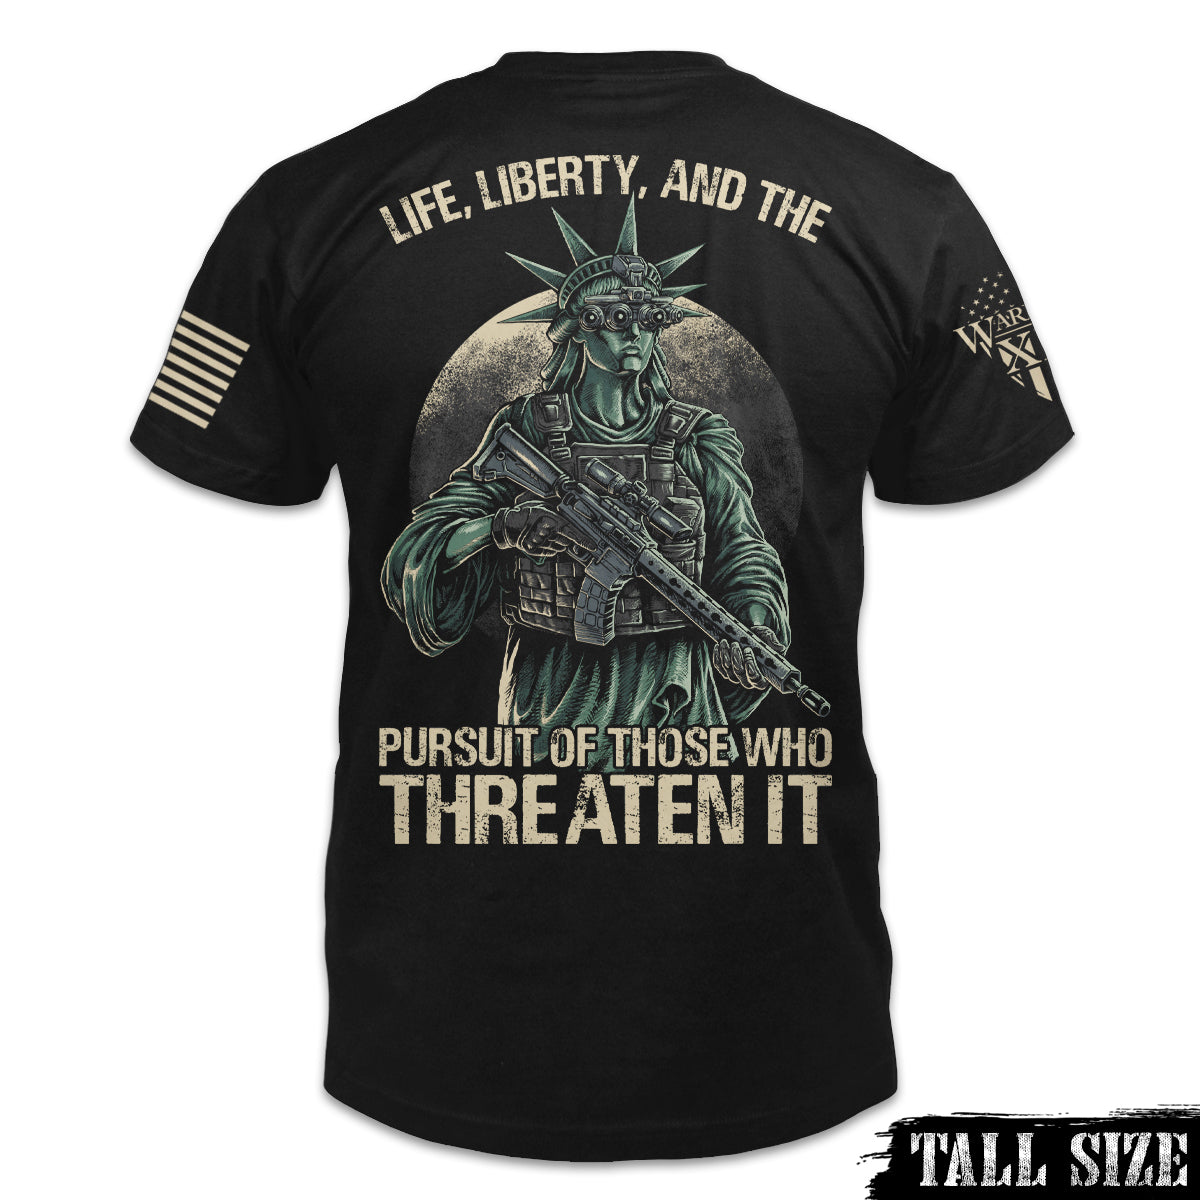 A black tall size shirt with the words "Life, liberty, and the pursuit of those who threaten it" with the statue of liberty holding a gun printed on the back of the shirt.